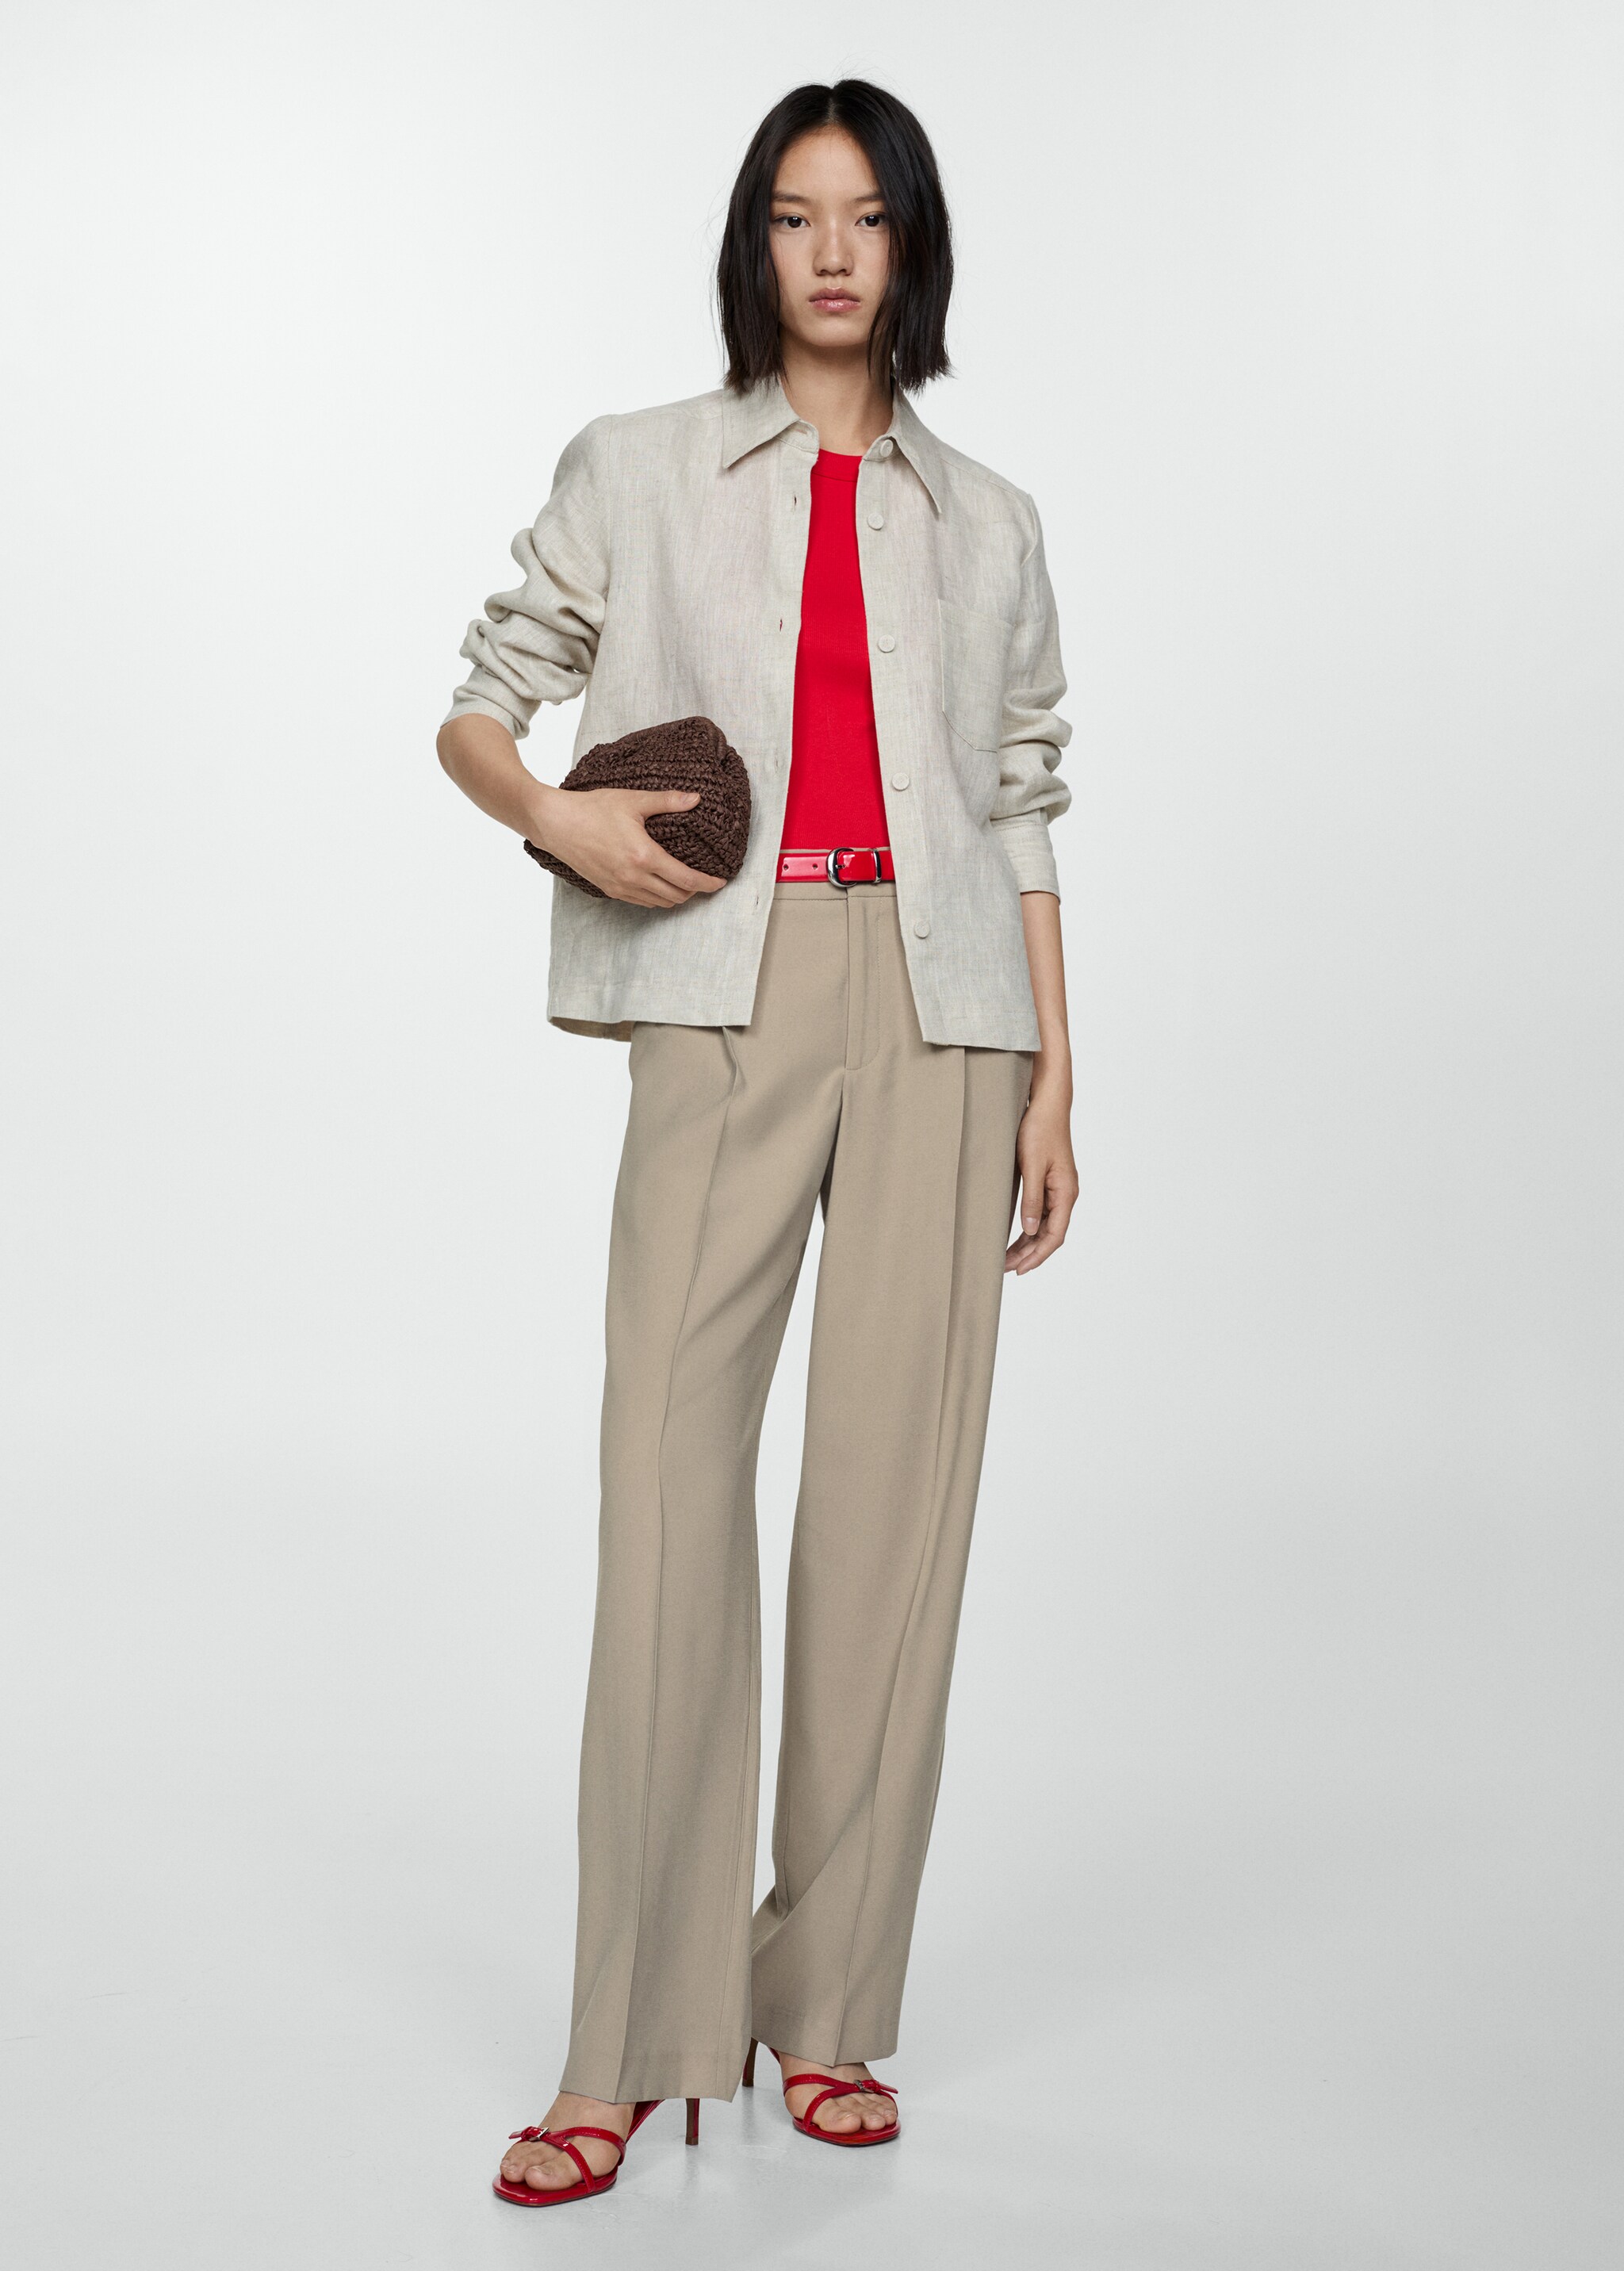 Pleat straight trousers - General plane